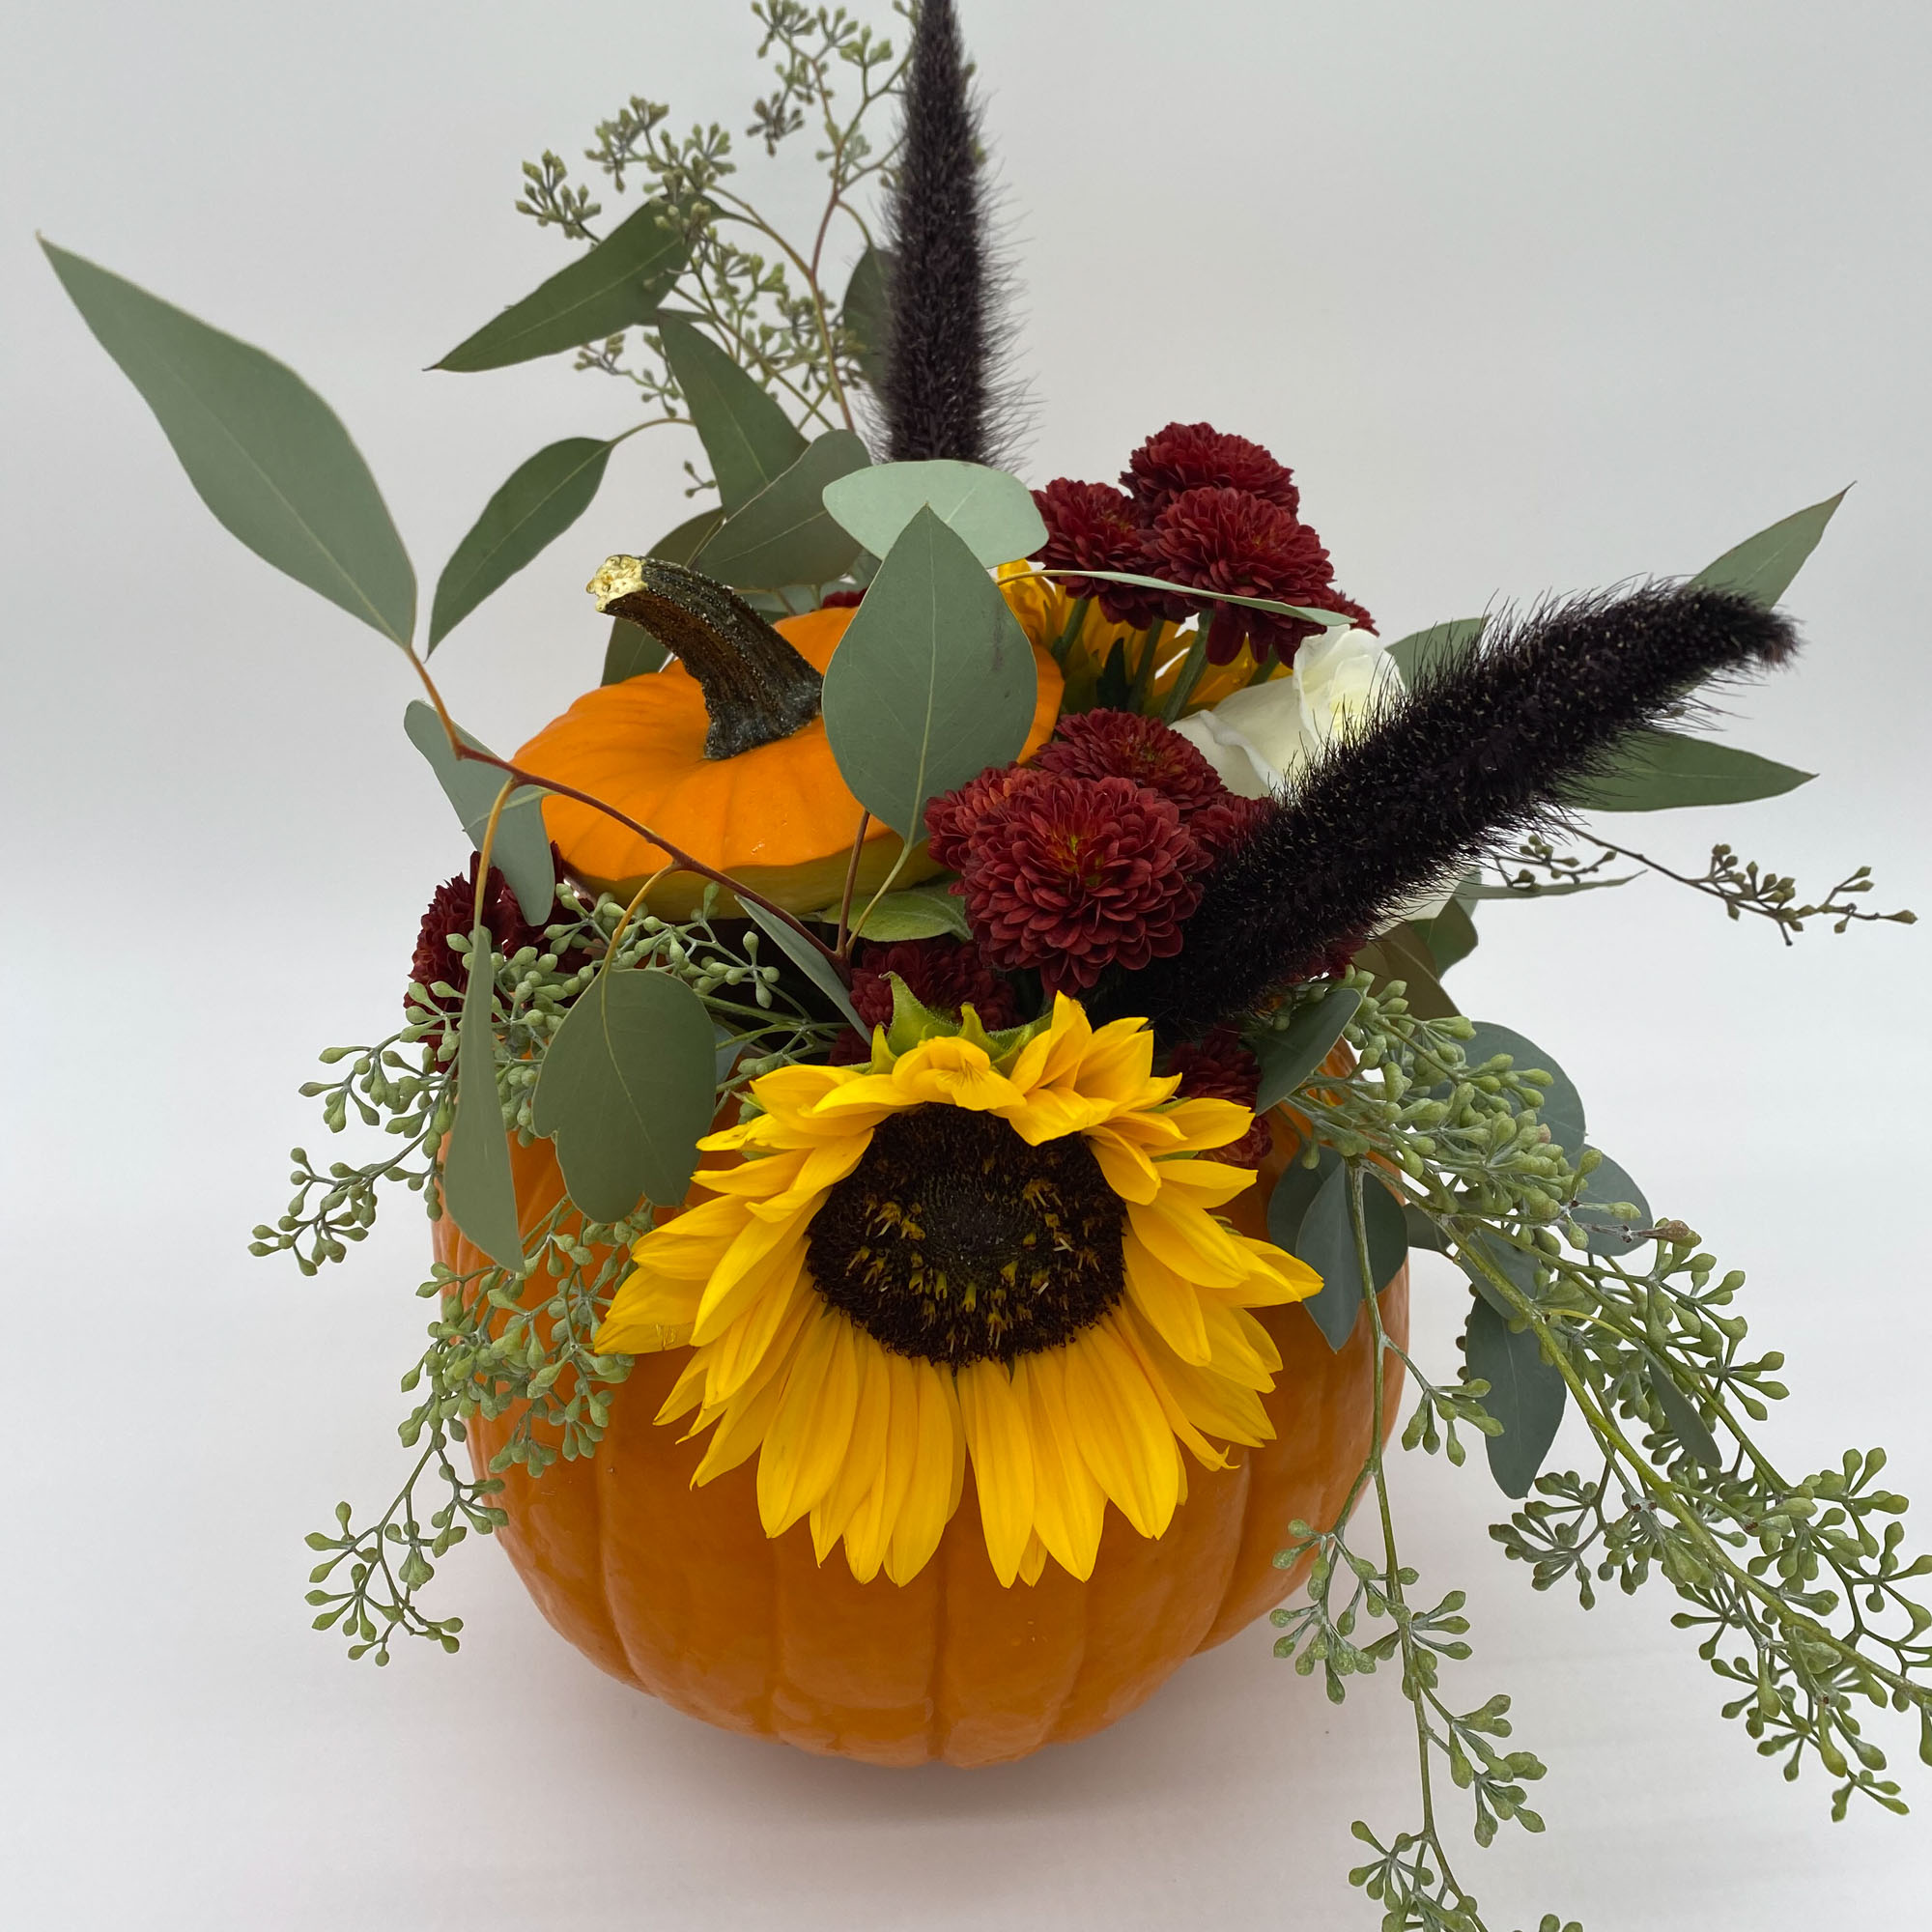 Photo of a floral arrangement with sunflowers and other plants in an orange pumpkin.